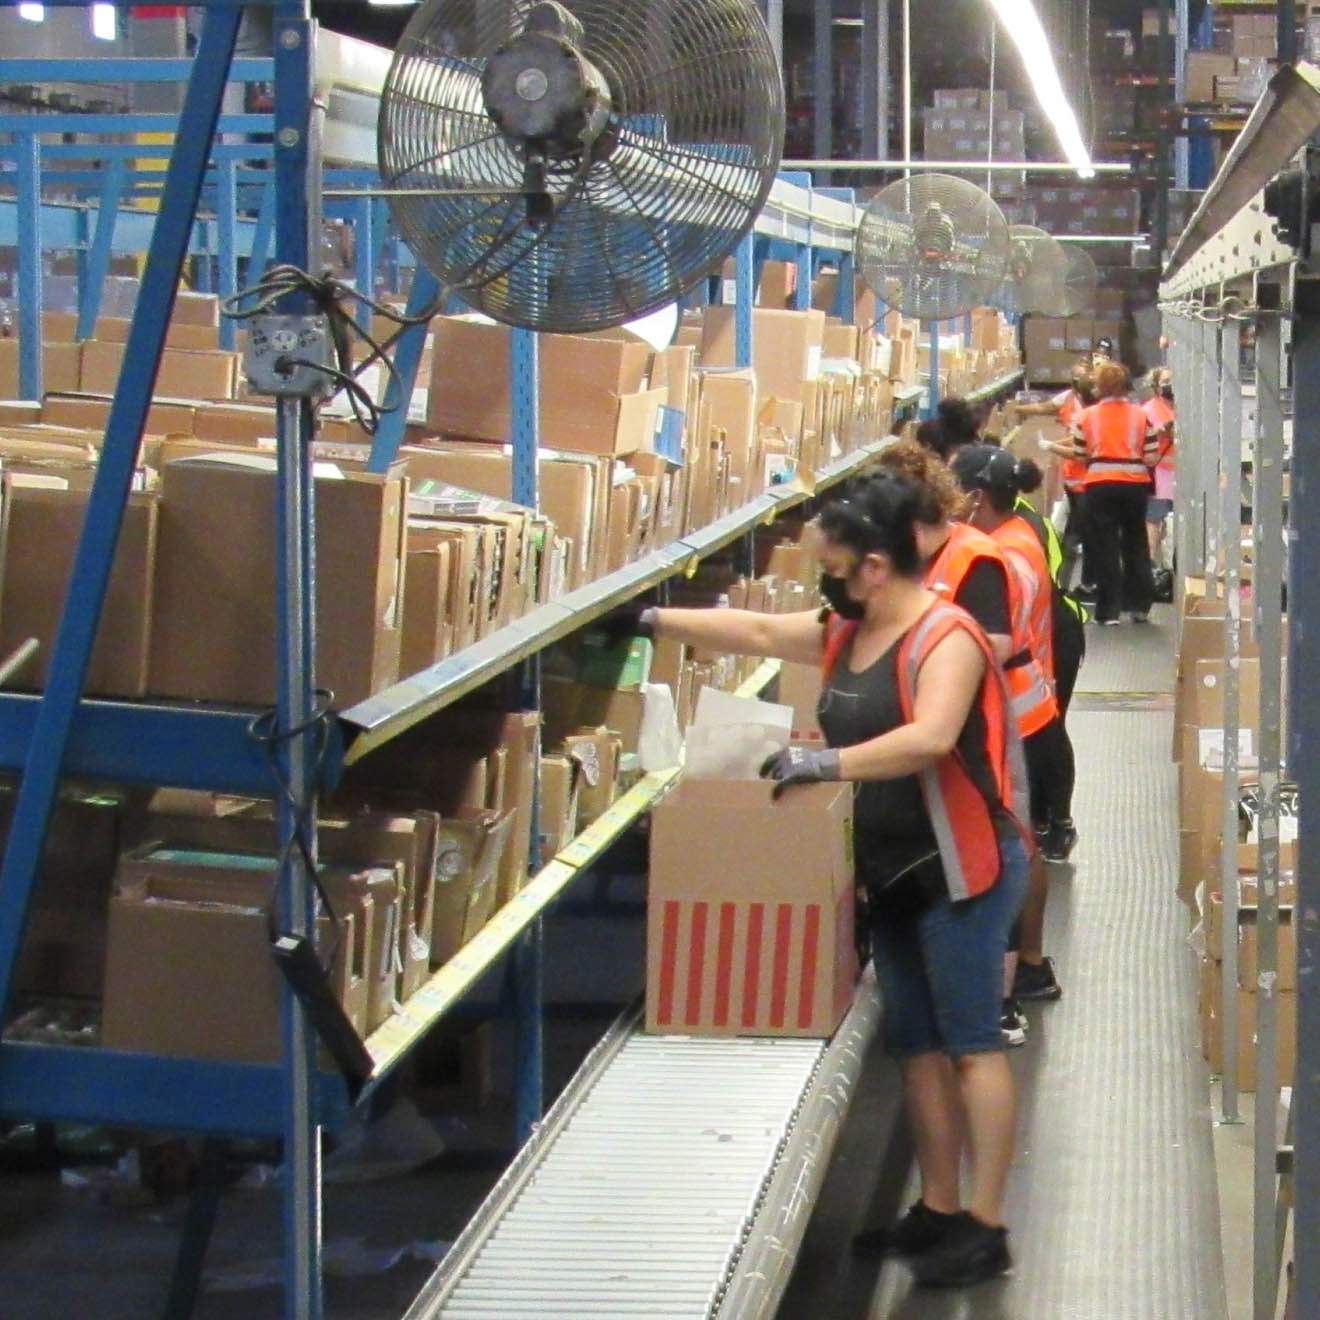 ReaderLink employees packing boxes at the warehouse